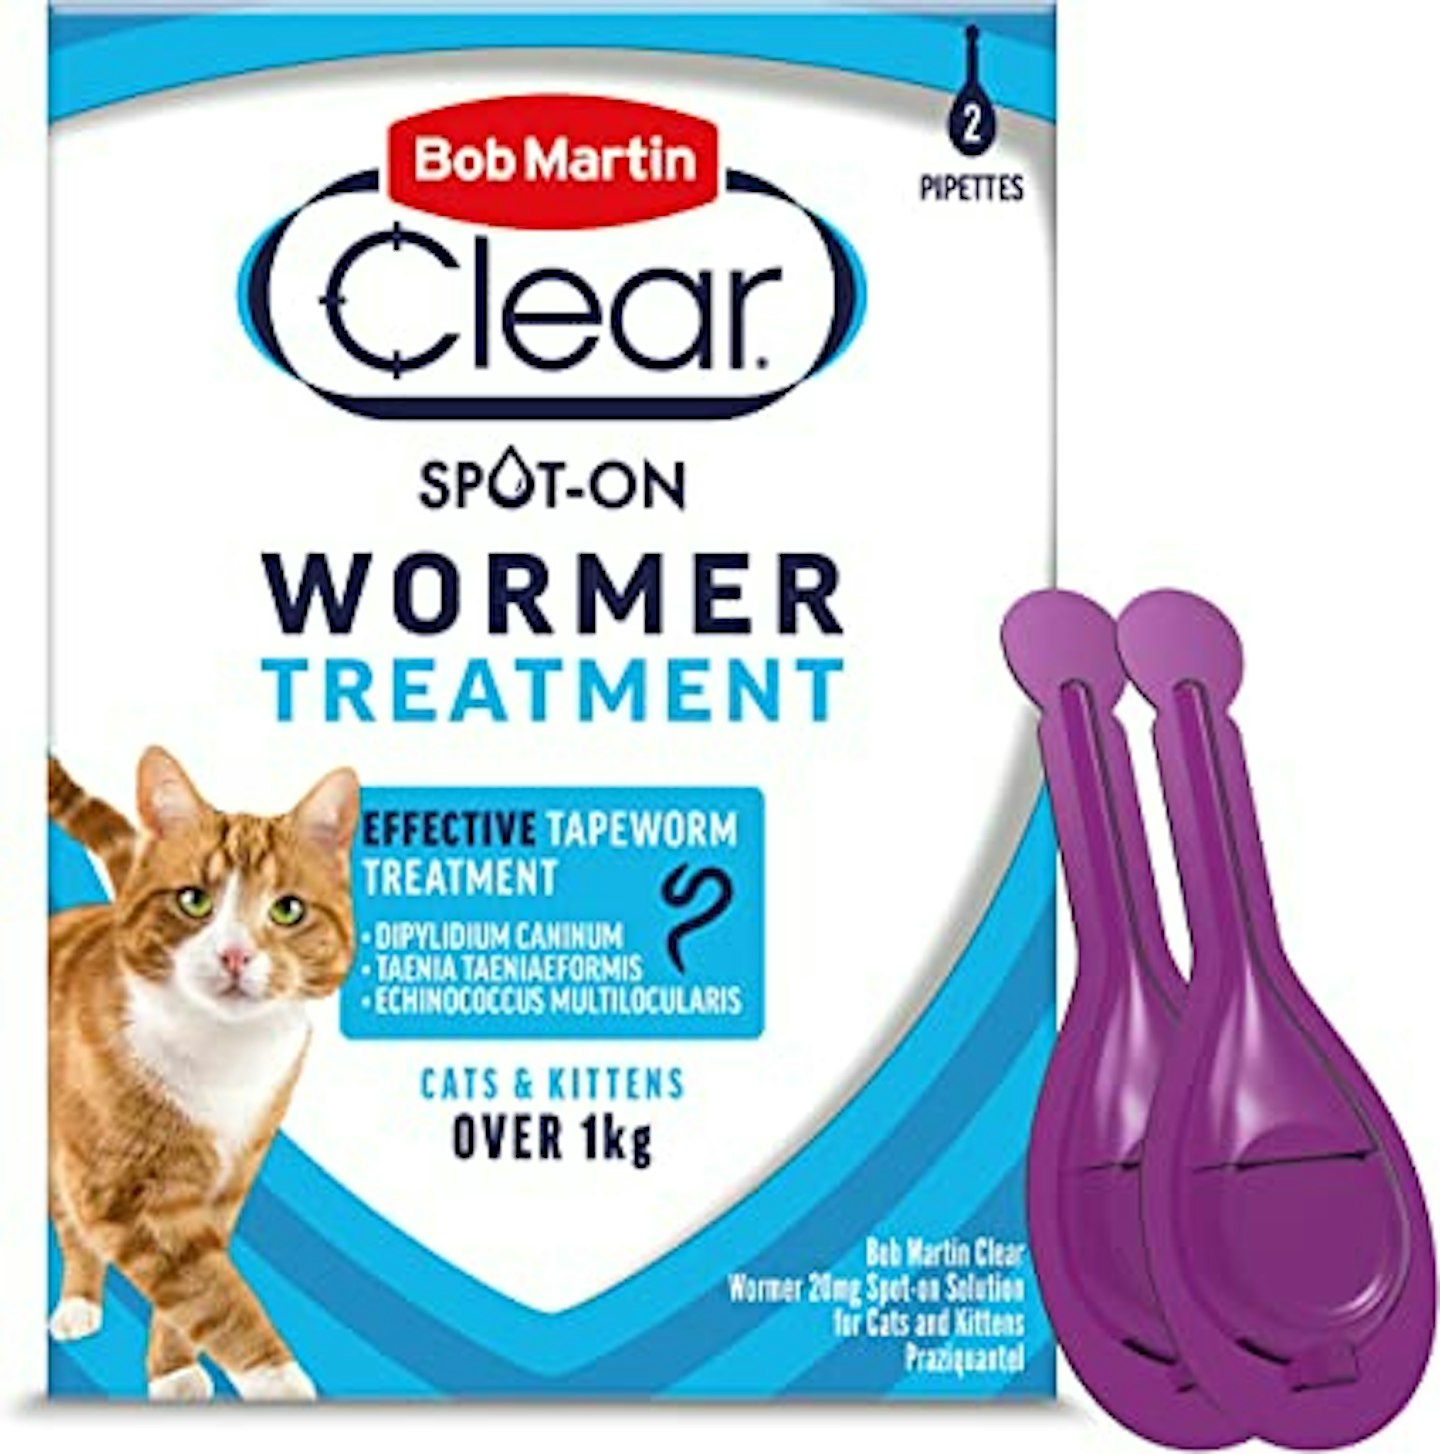 Bob Martin Clear Spot On Wormer for Cats & Kittens